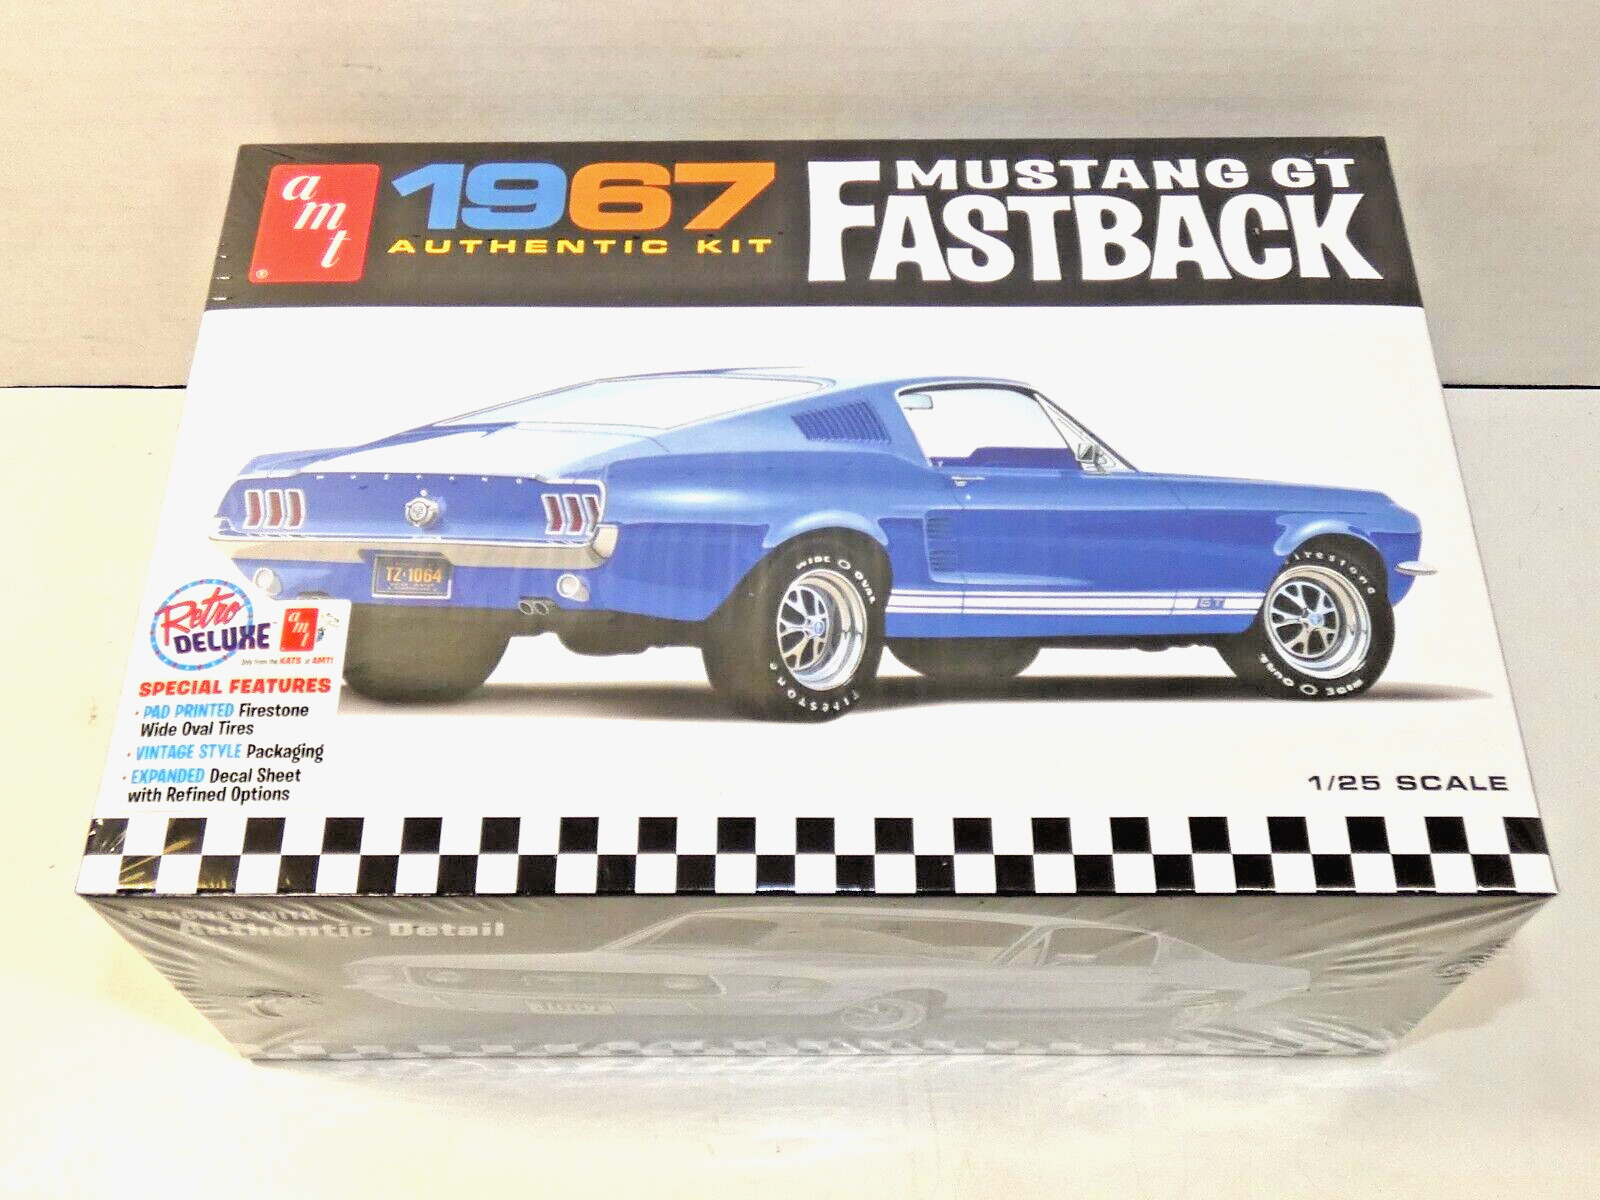 New Sealed AMT 1967 MUSTANG GT FASTBACK 1:25 Authentic Model NIB